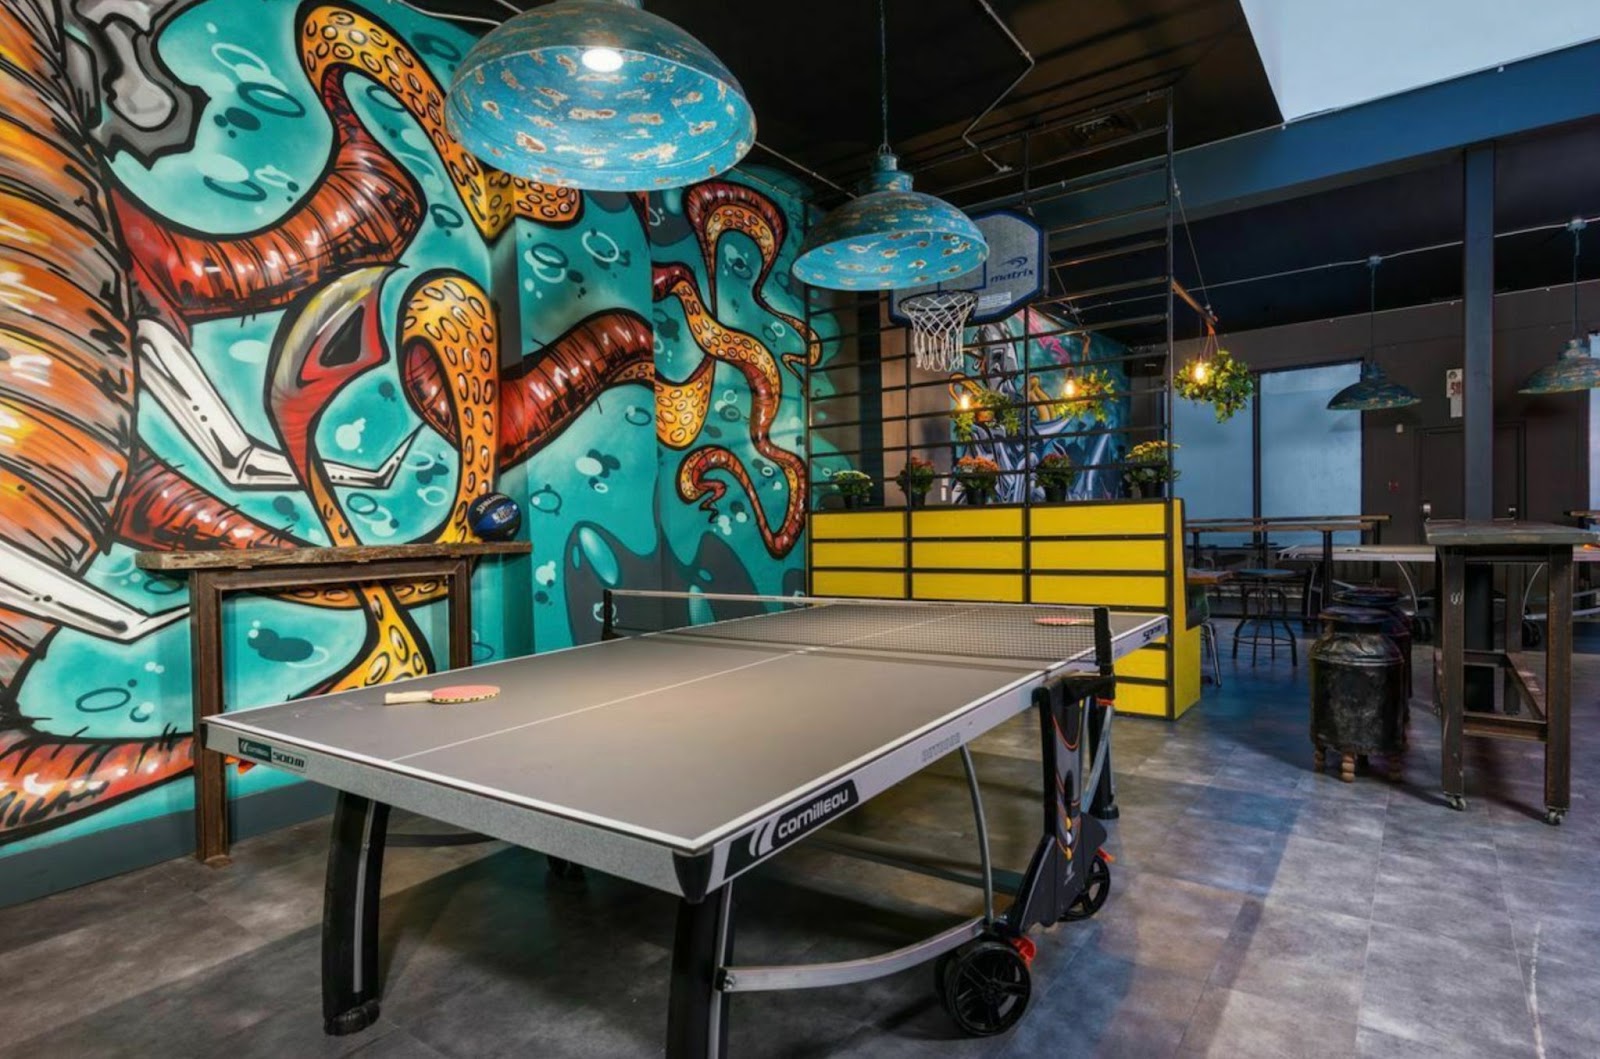 colorful graffiti style wall art in game room 